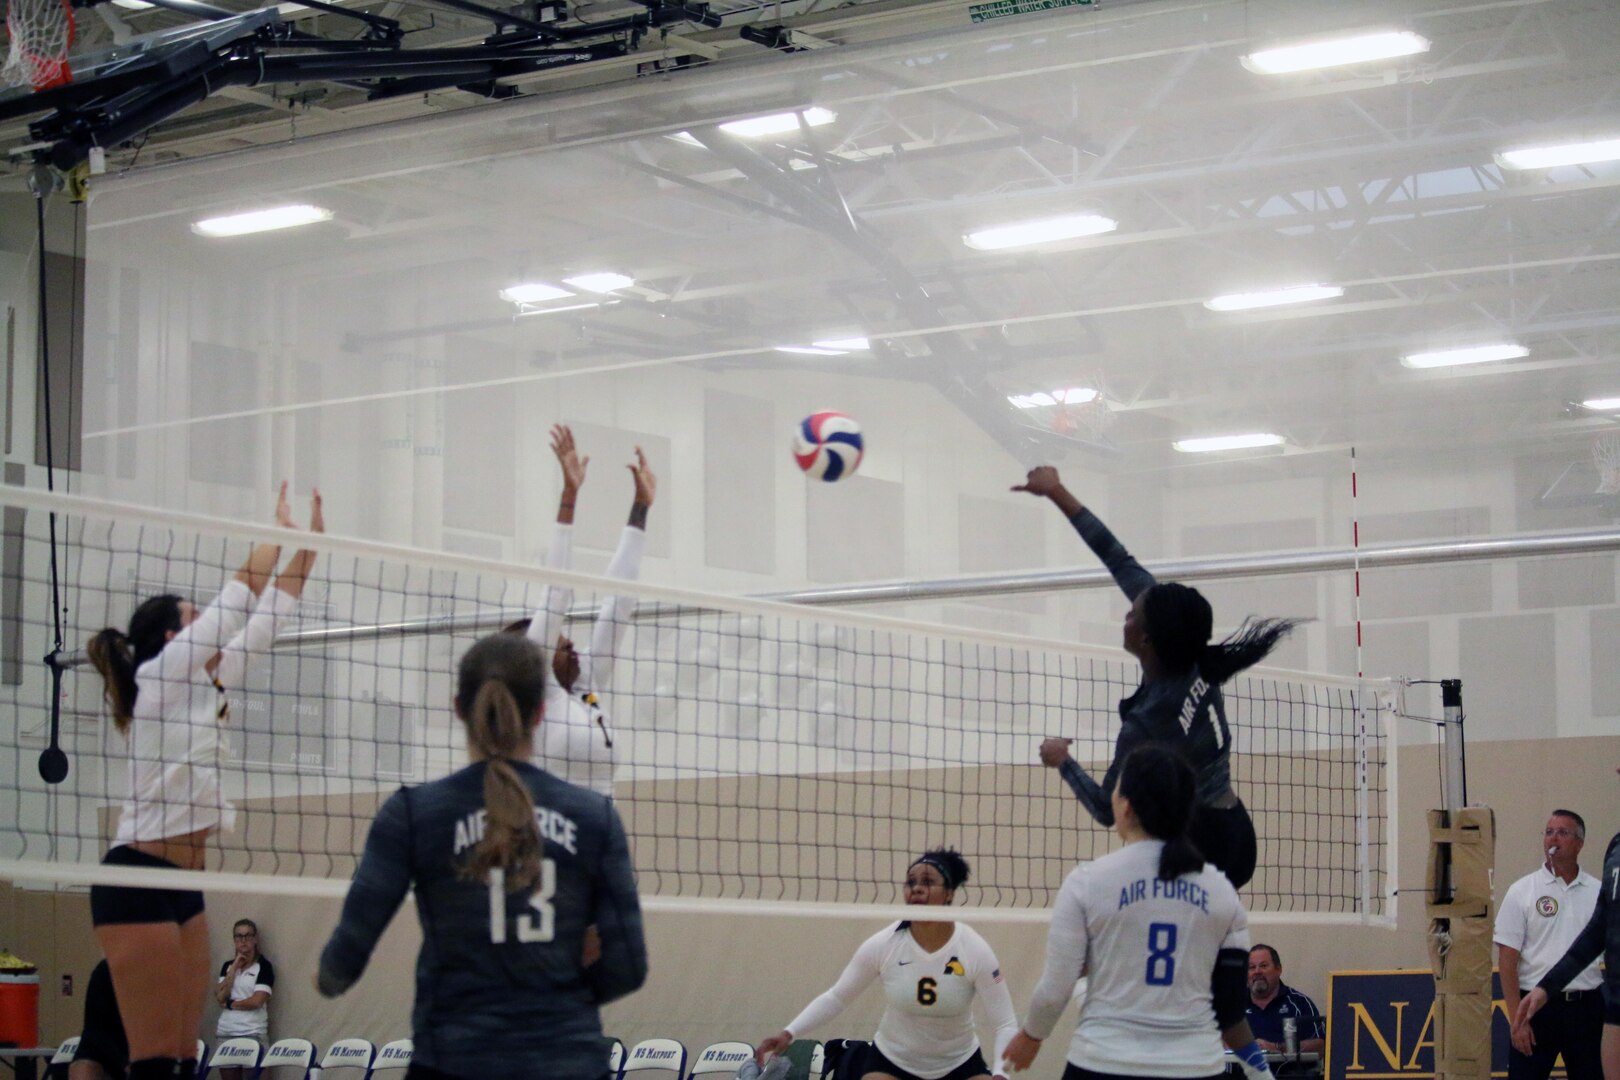 Air Force 2nd lt. Felicia Clement (#1) goes for the kill in Match 4 of the 2017 Armed Forces Women's Volleyball Championship at Naval Station Mayport, Florida on 18 May.